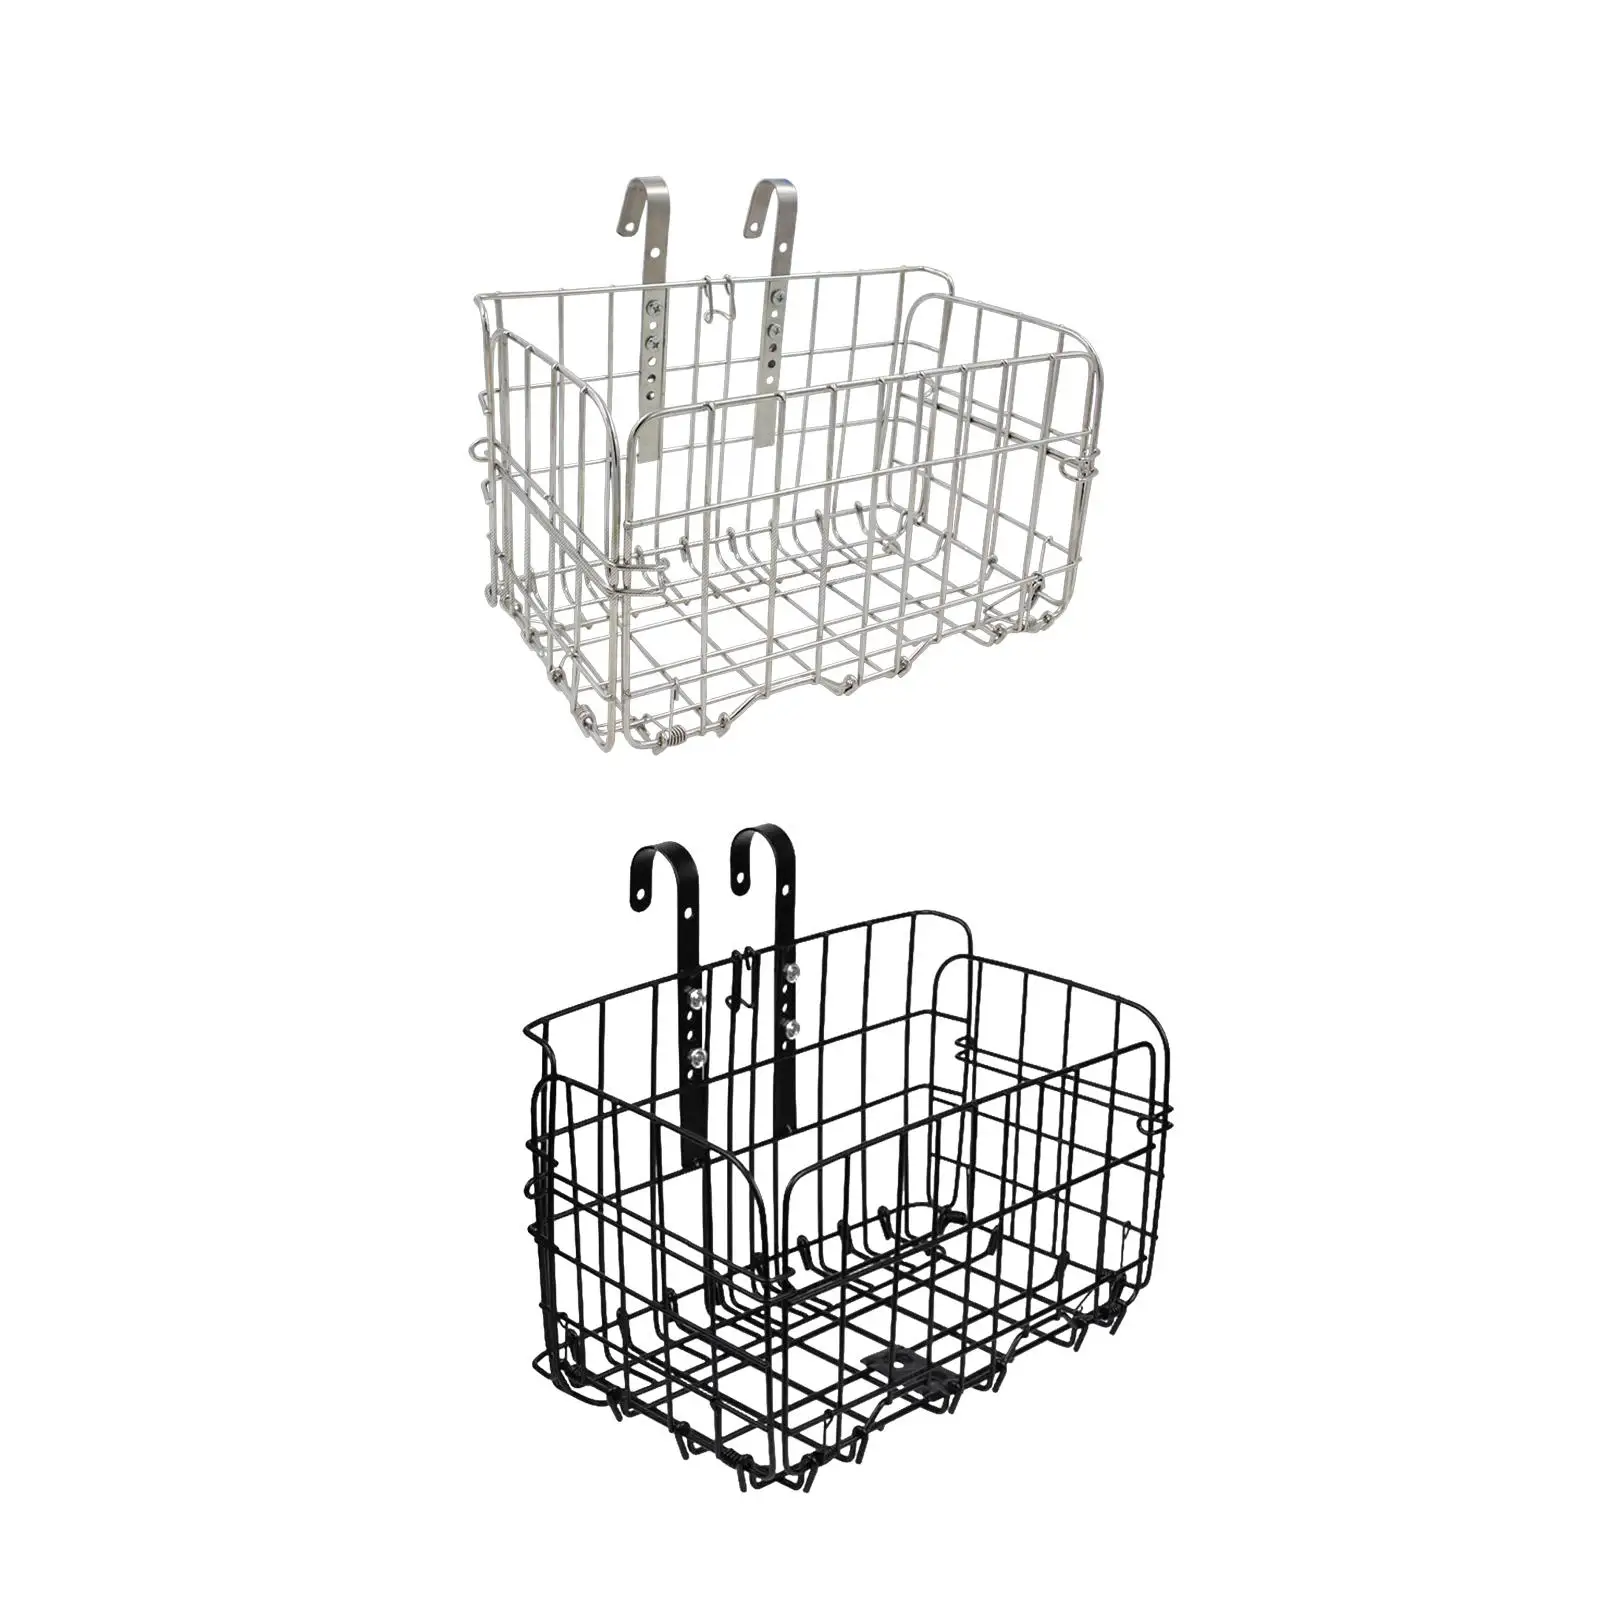 Folding Bicycle Storage Basket Bike Shopping Basket Durable Multipurpose Thicken Metal Wire Small Pet Carrier for Daily Commute